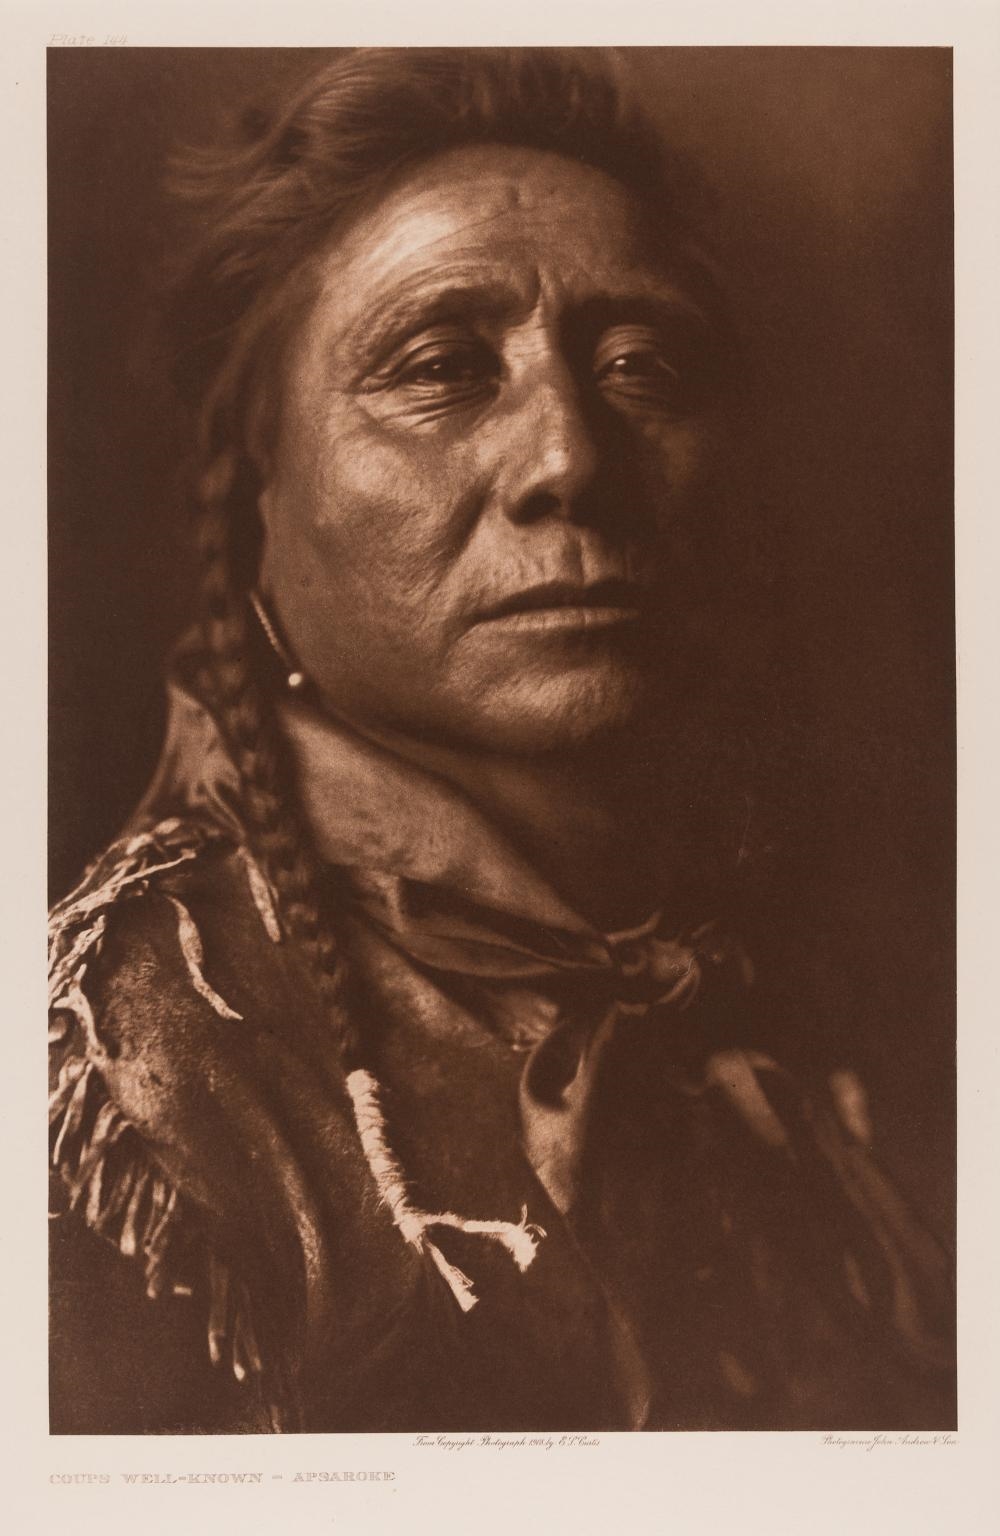 Coups Well Known - Apsaroke, 1908